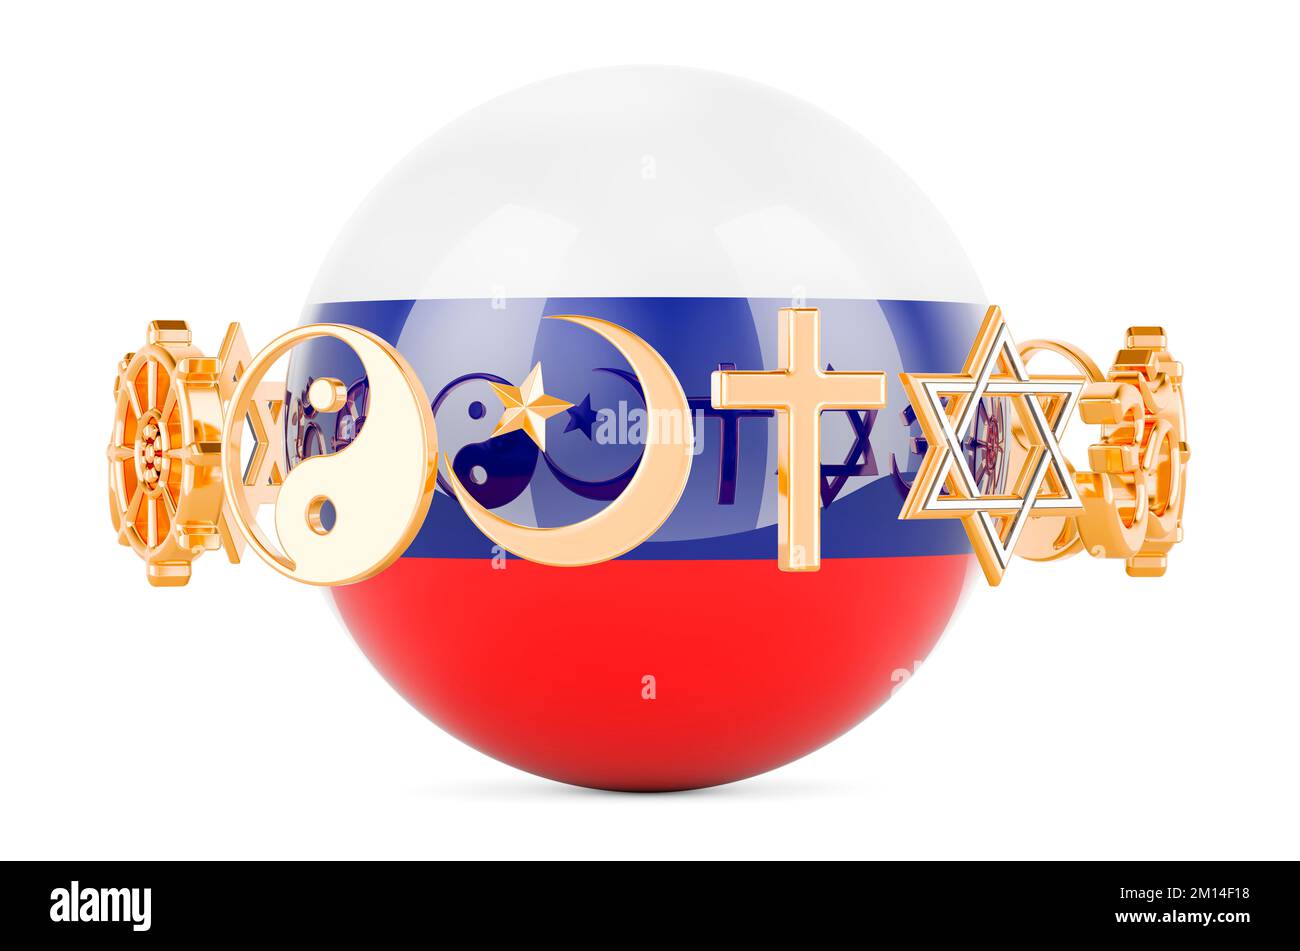 Russian flag painted on sphere with religions symbols around, 3D rendering isolated on white background Stock Photo